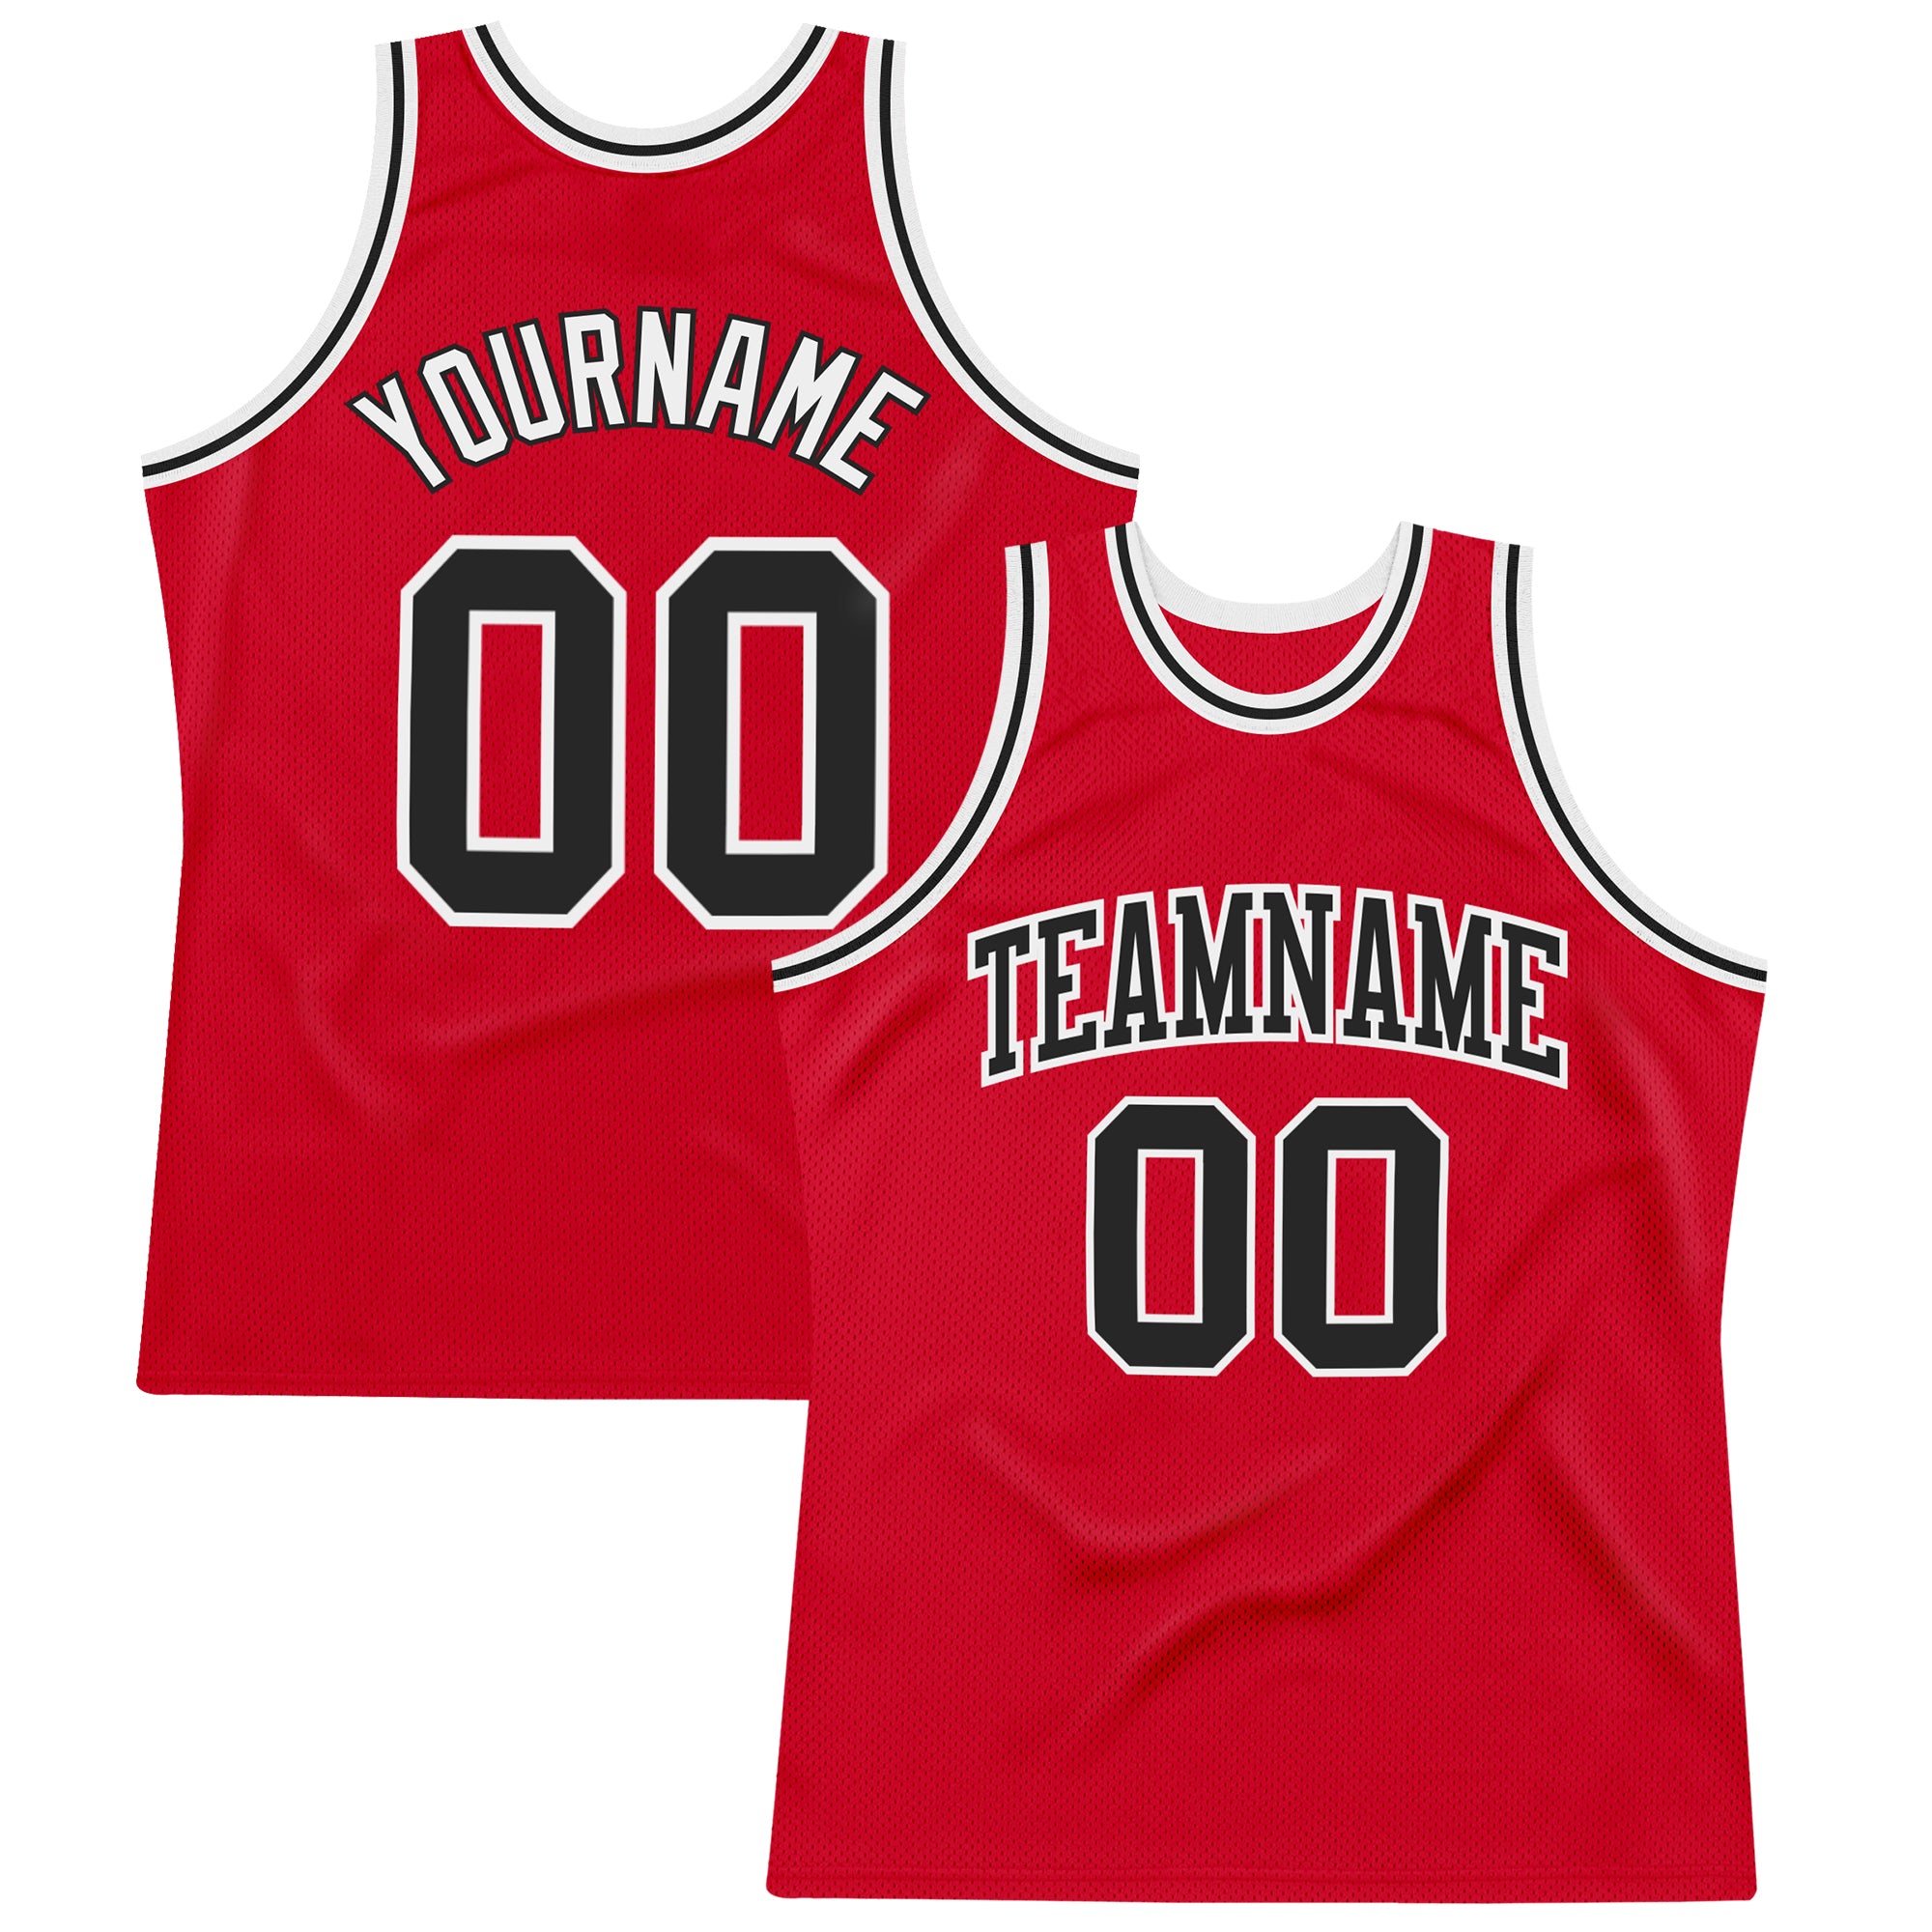 Custom Red Basketball Jersey Black-White Authentic Throwback - FansIdea